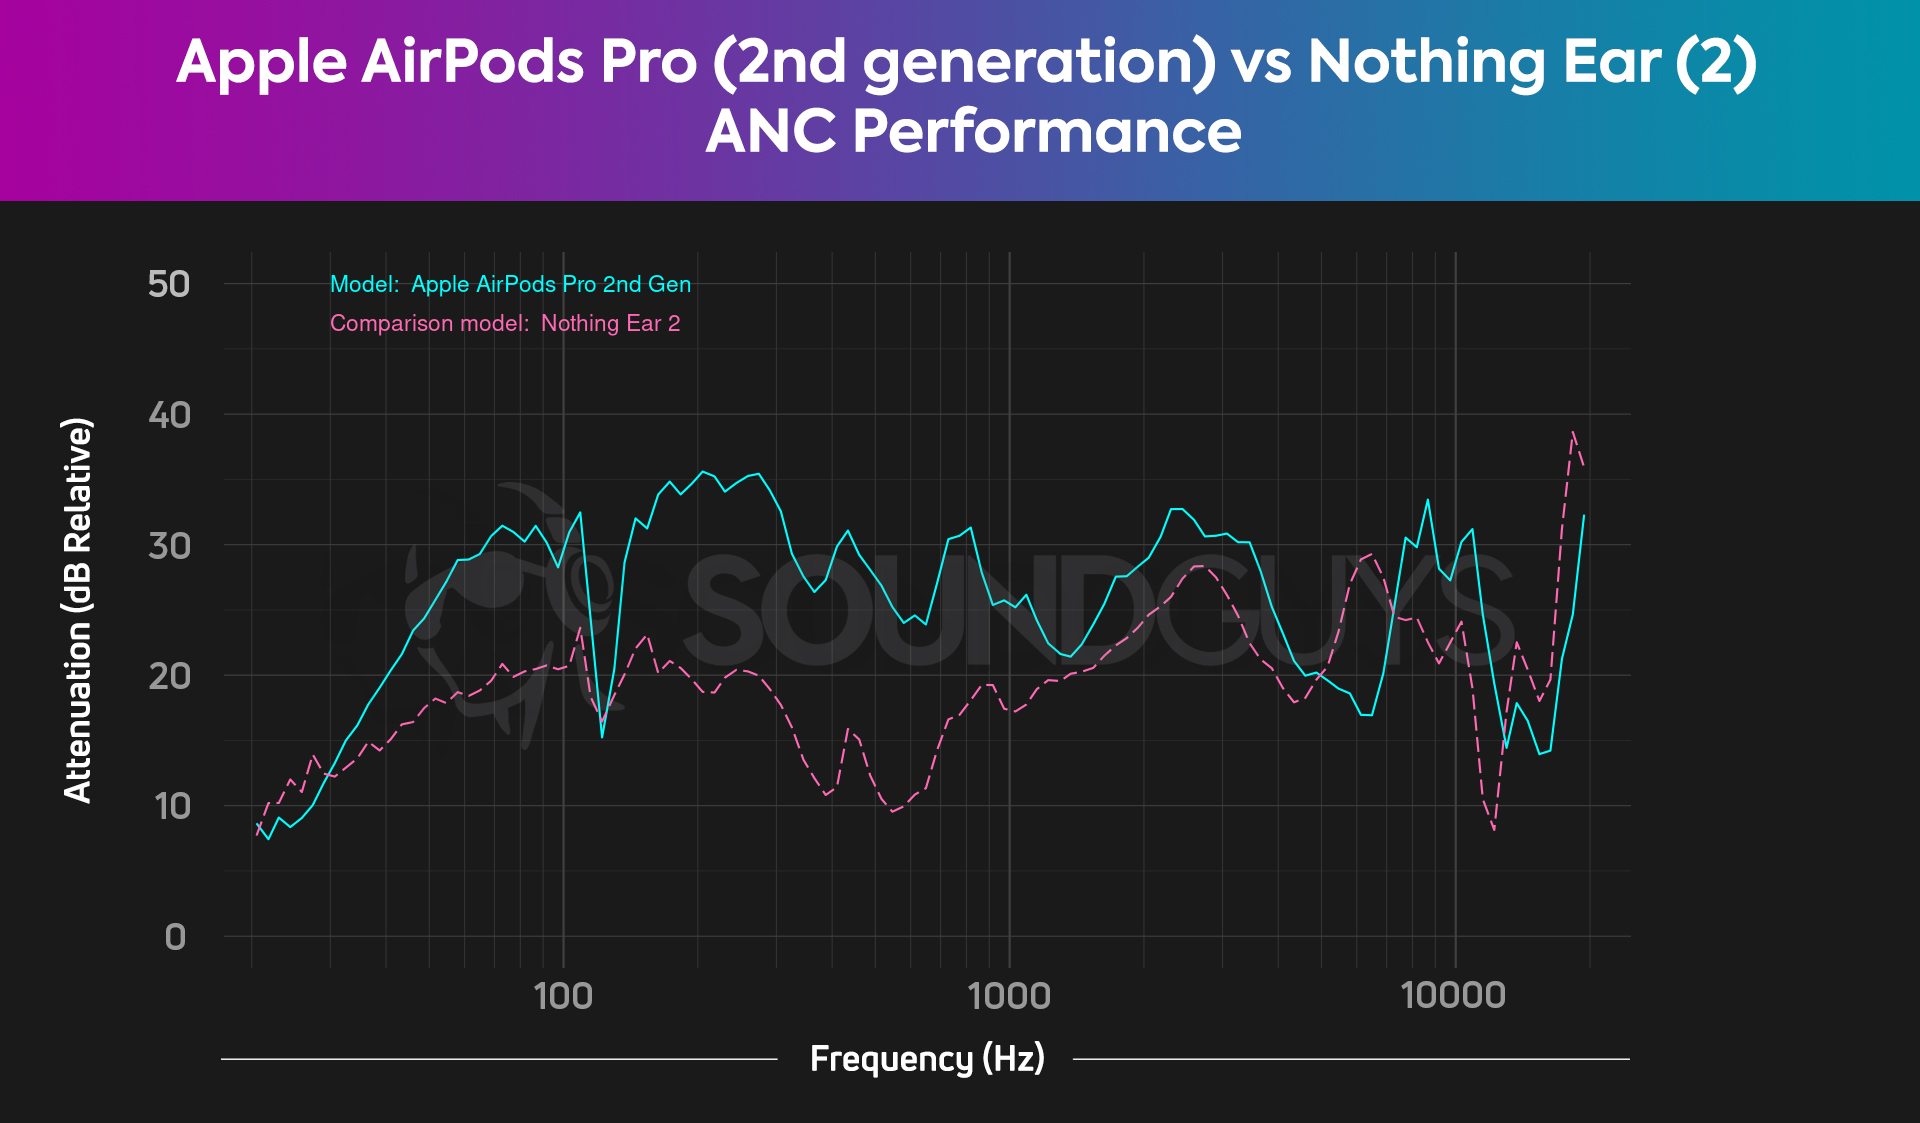 A chart showing the Apple AirPods Pro (2nd generation) with better ANC than the Nothing Ear (2).